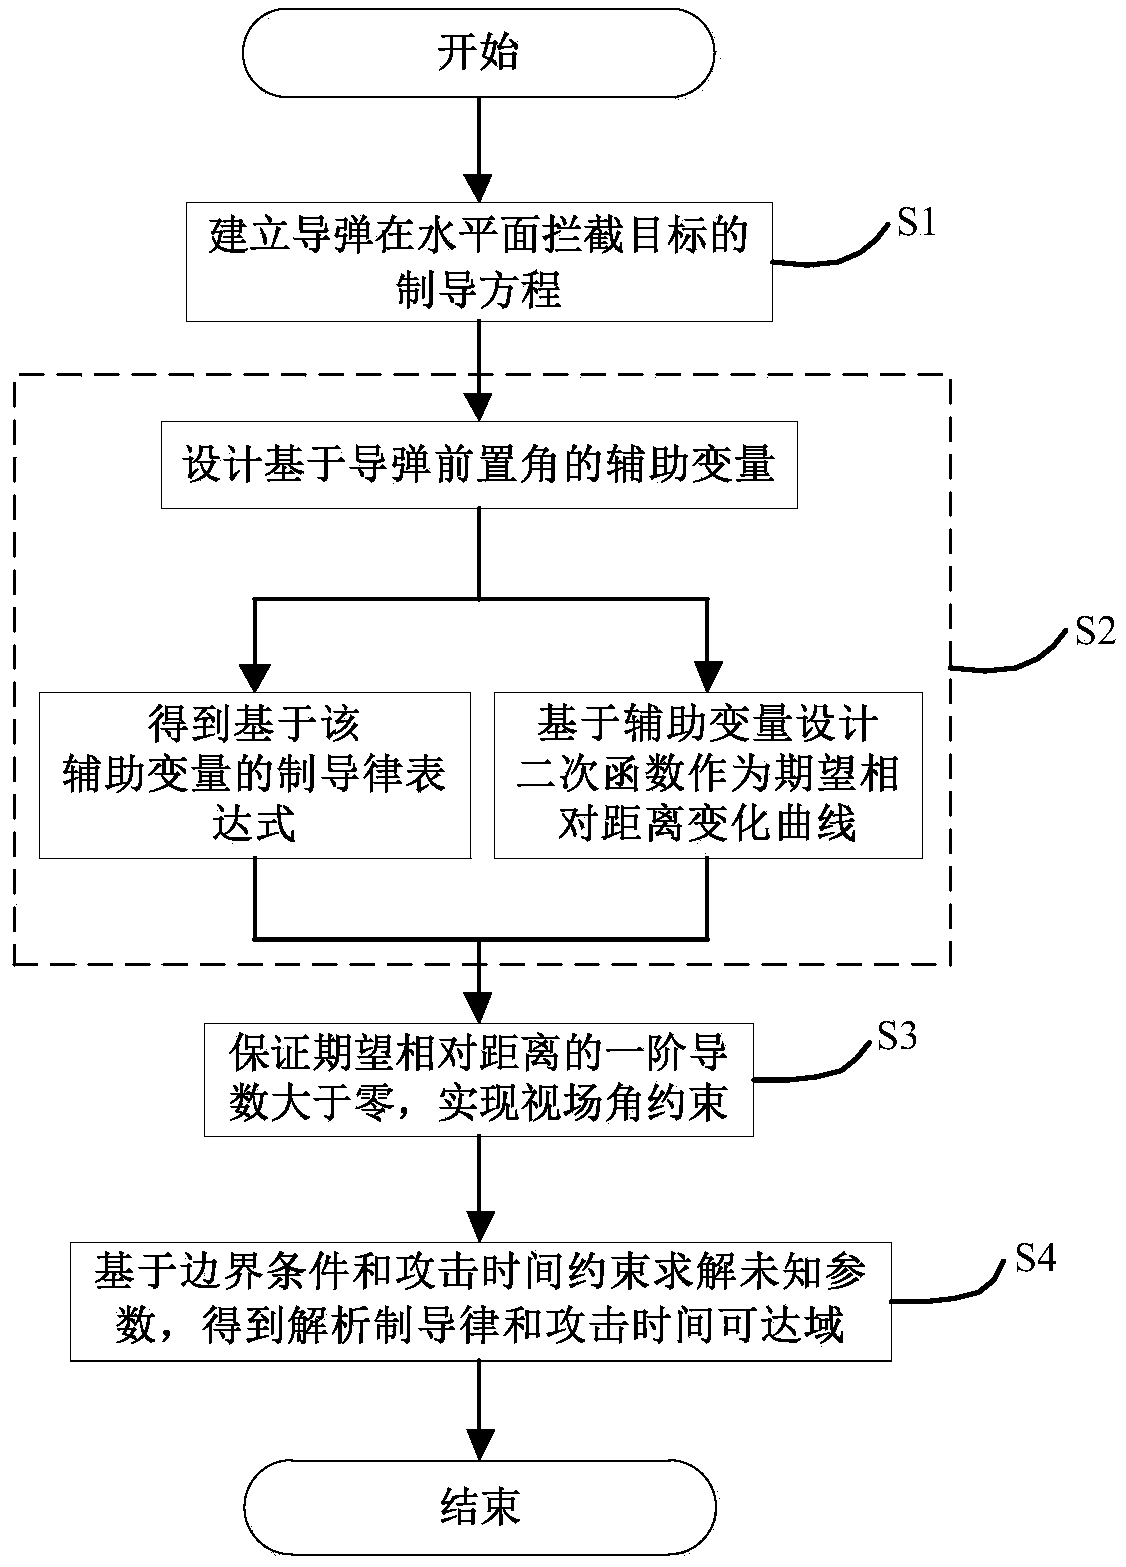 Guidance law analysis method with attack time and seeker view field constraint